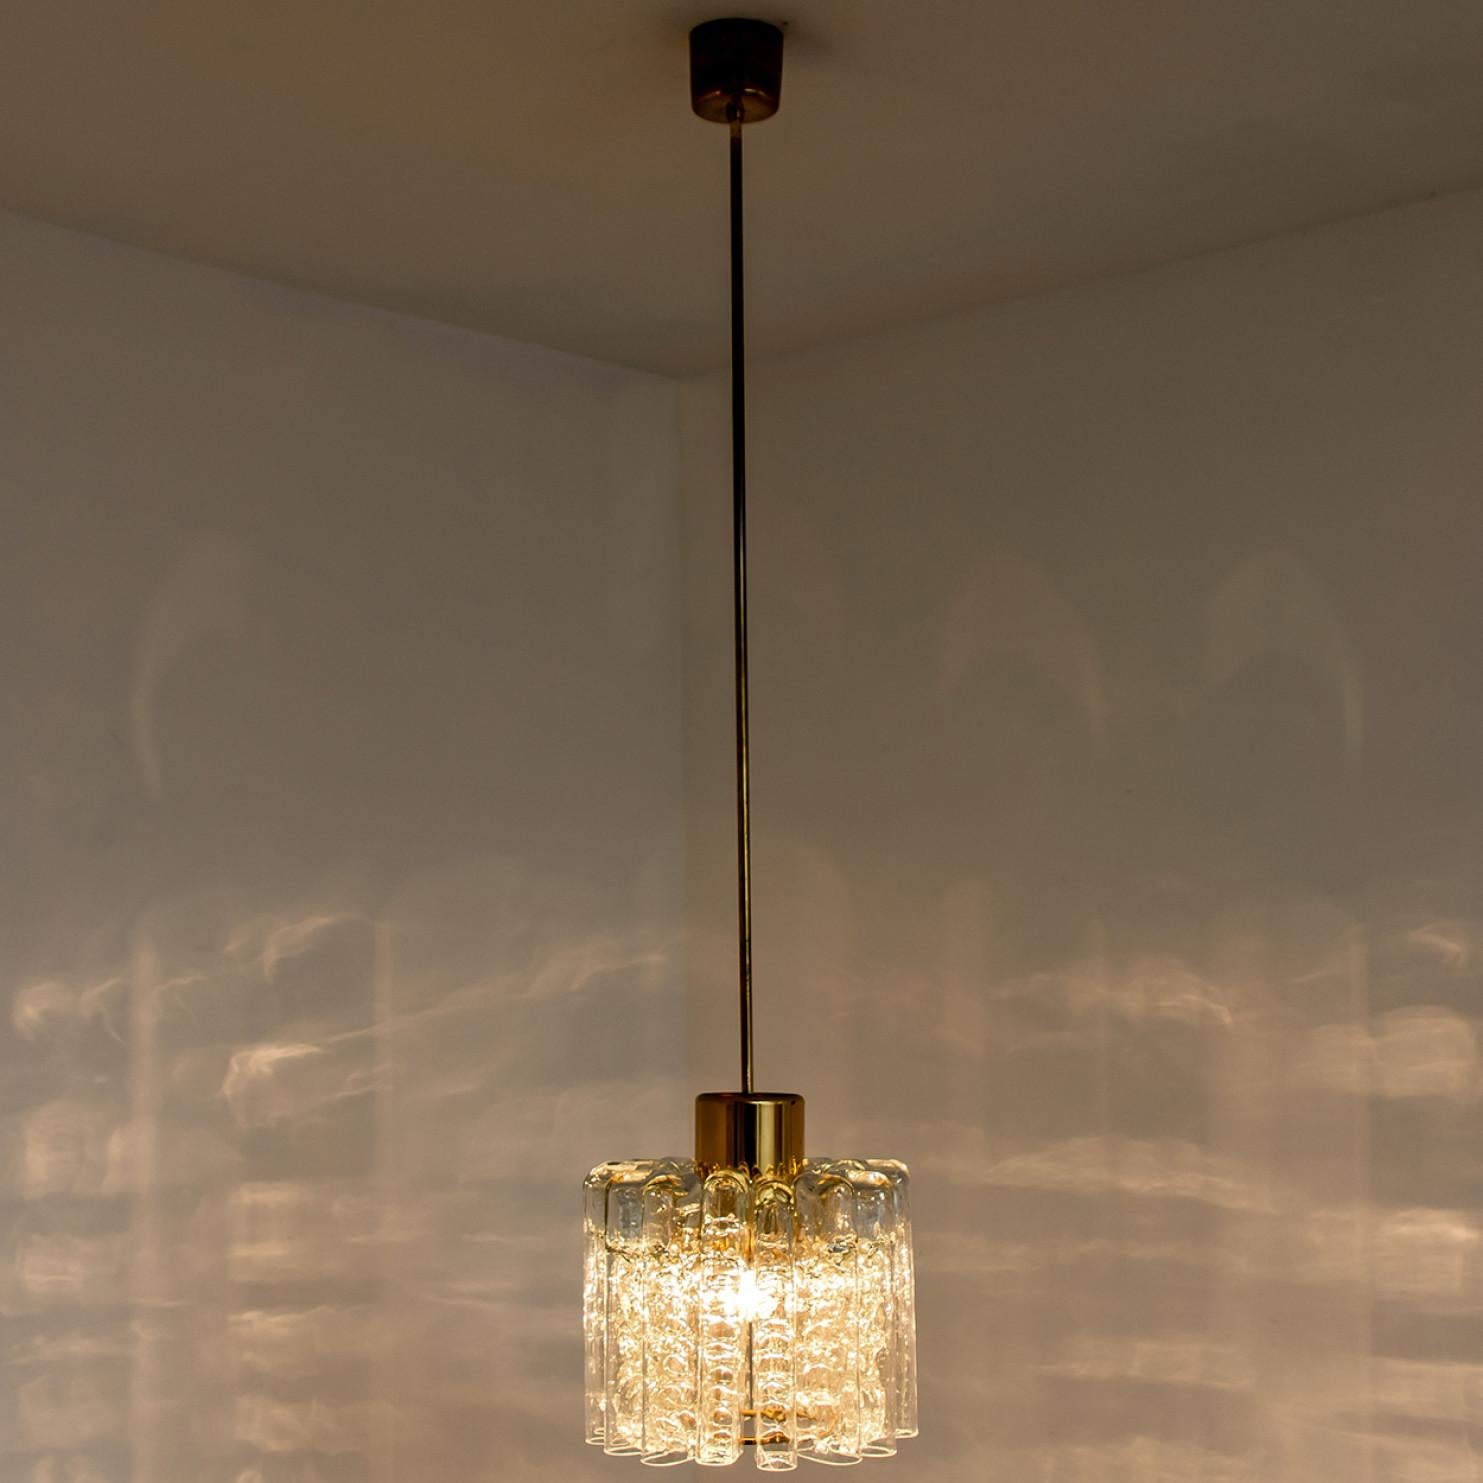 German 1 of the 2 Round Textured Clear Glass Doria Pendant Lamp, 1960s For Sale